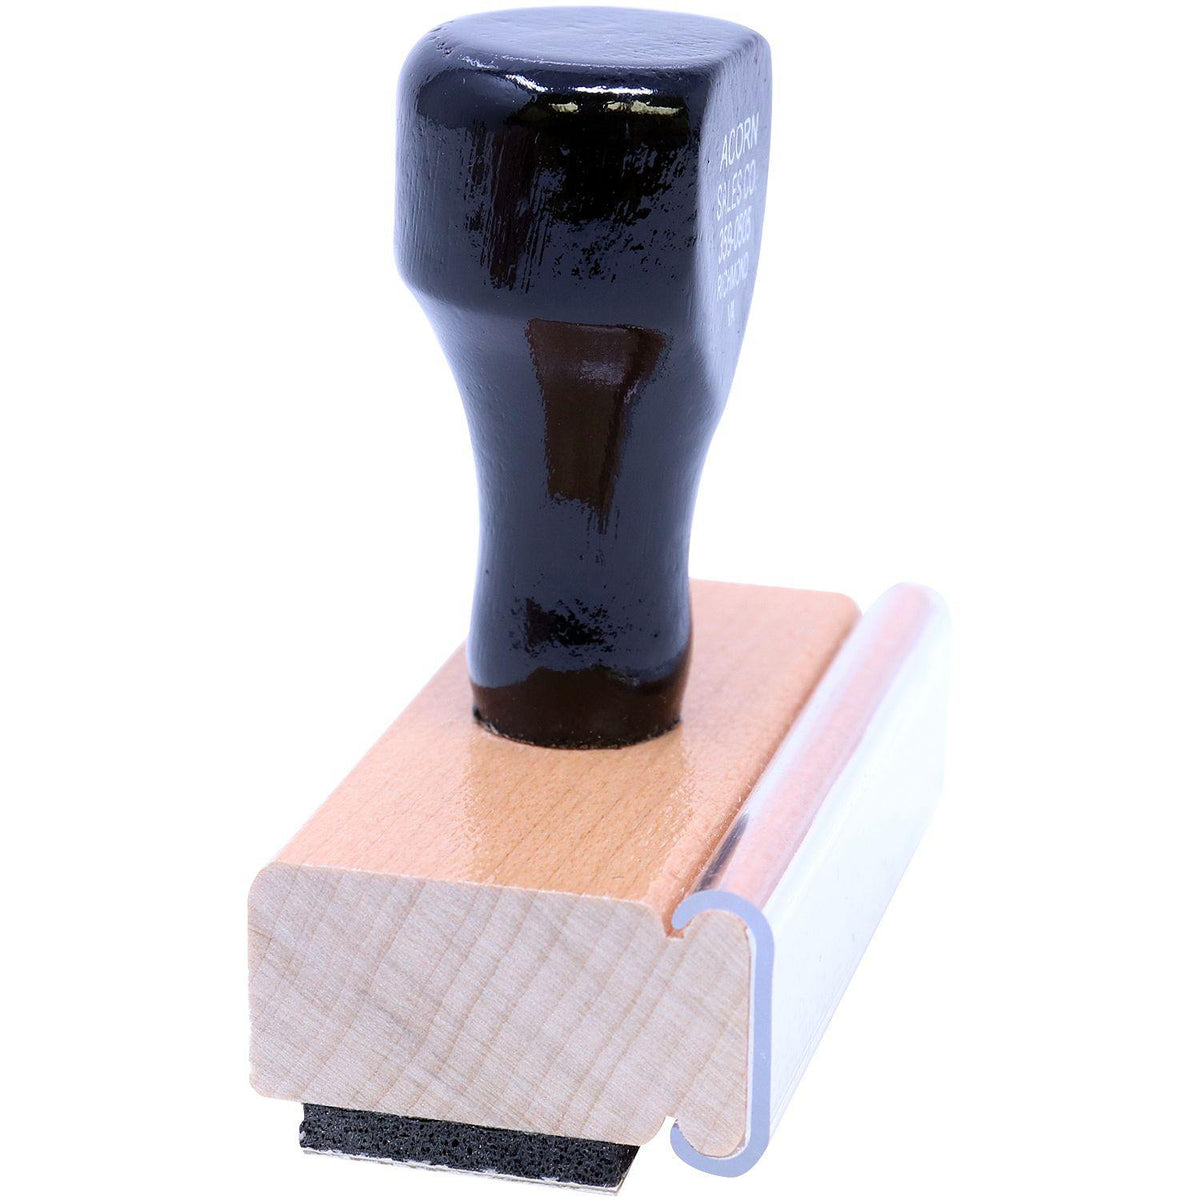 Large Validate Only Rubber Stamp - Engineer Seal Stamps - Brand_Acorn, Impression Size_Large, Stamp Type_Regular Stamp, Type of Use_Office